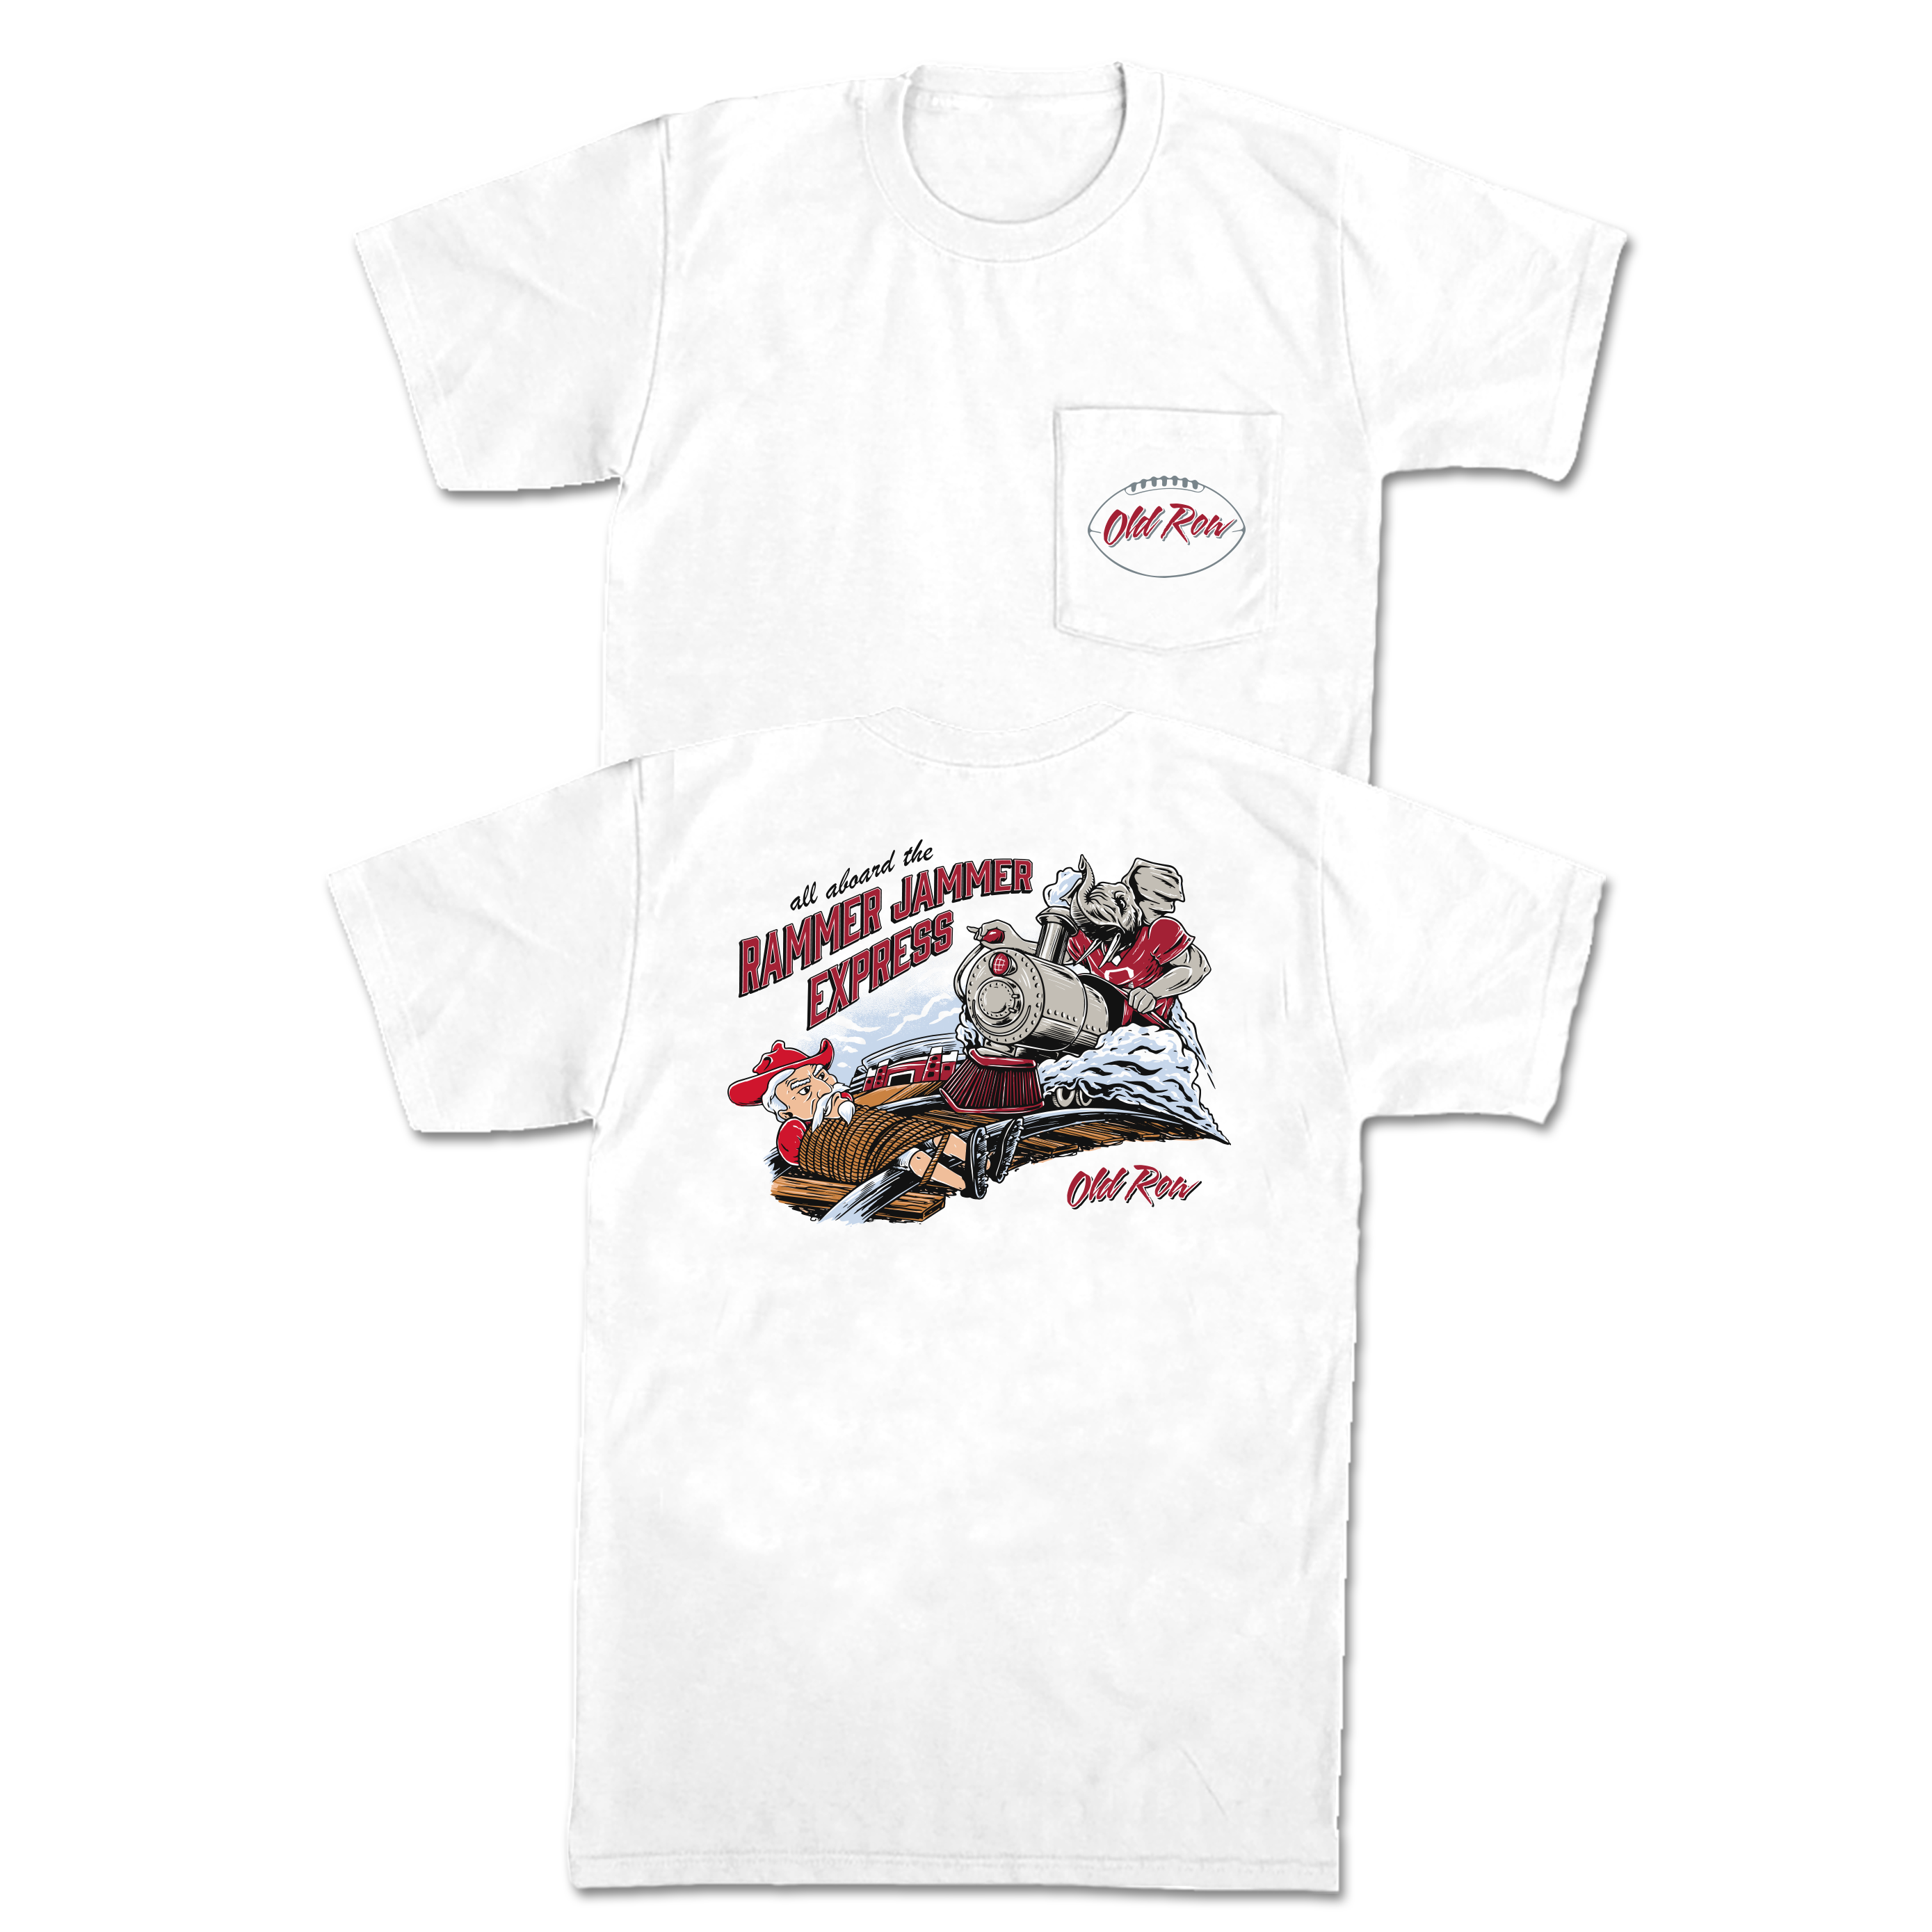 All Aboard The RJ Express Pocket Tee